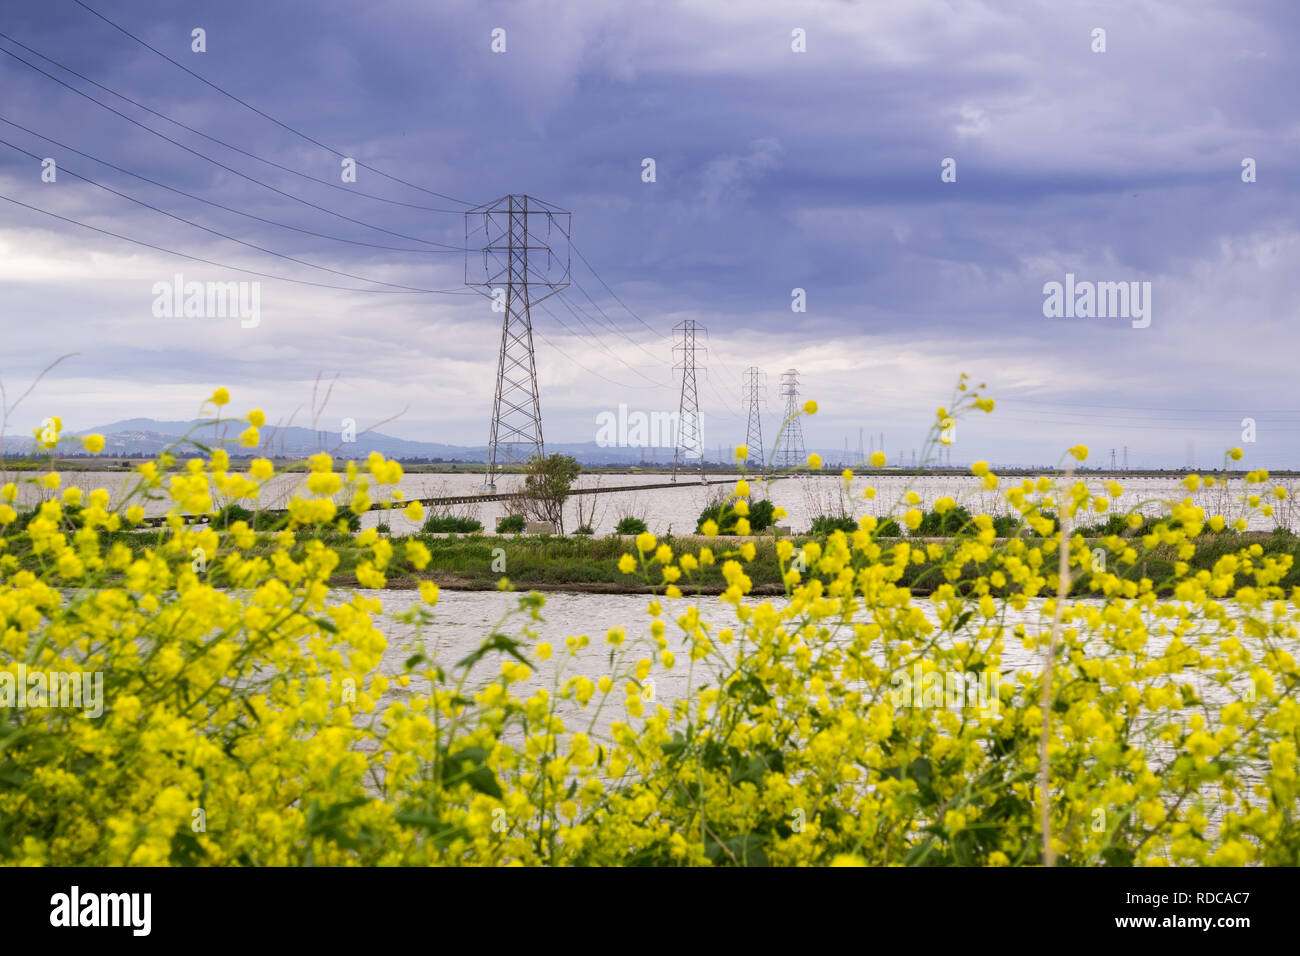 The wild mustard flowers blooming in spring on the bay trail, Sunnyvale, San Francisco bay, California Stock Photo